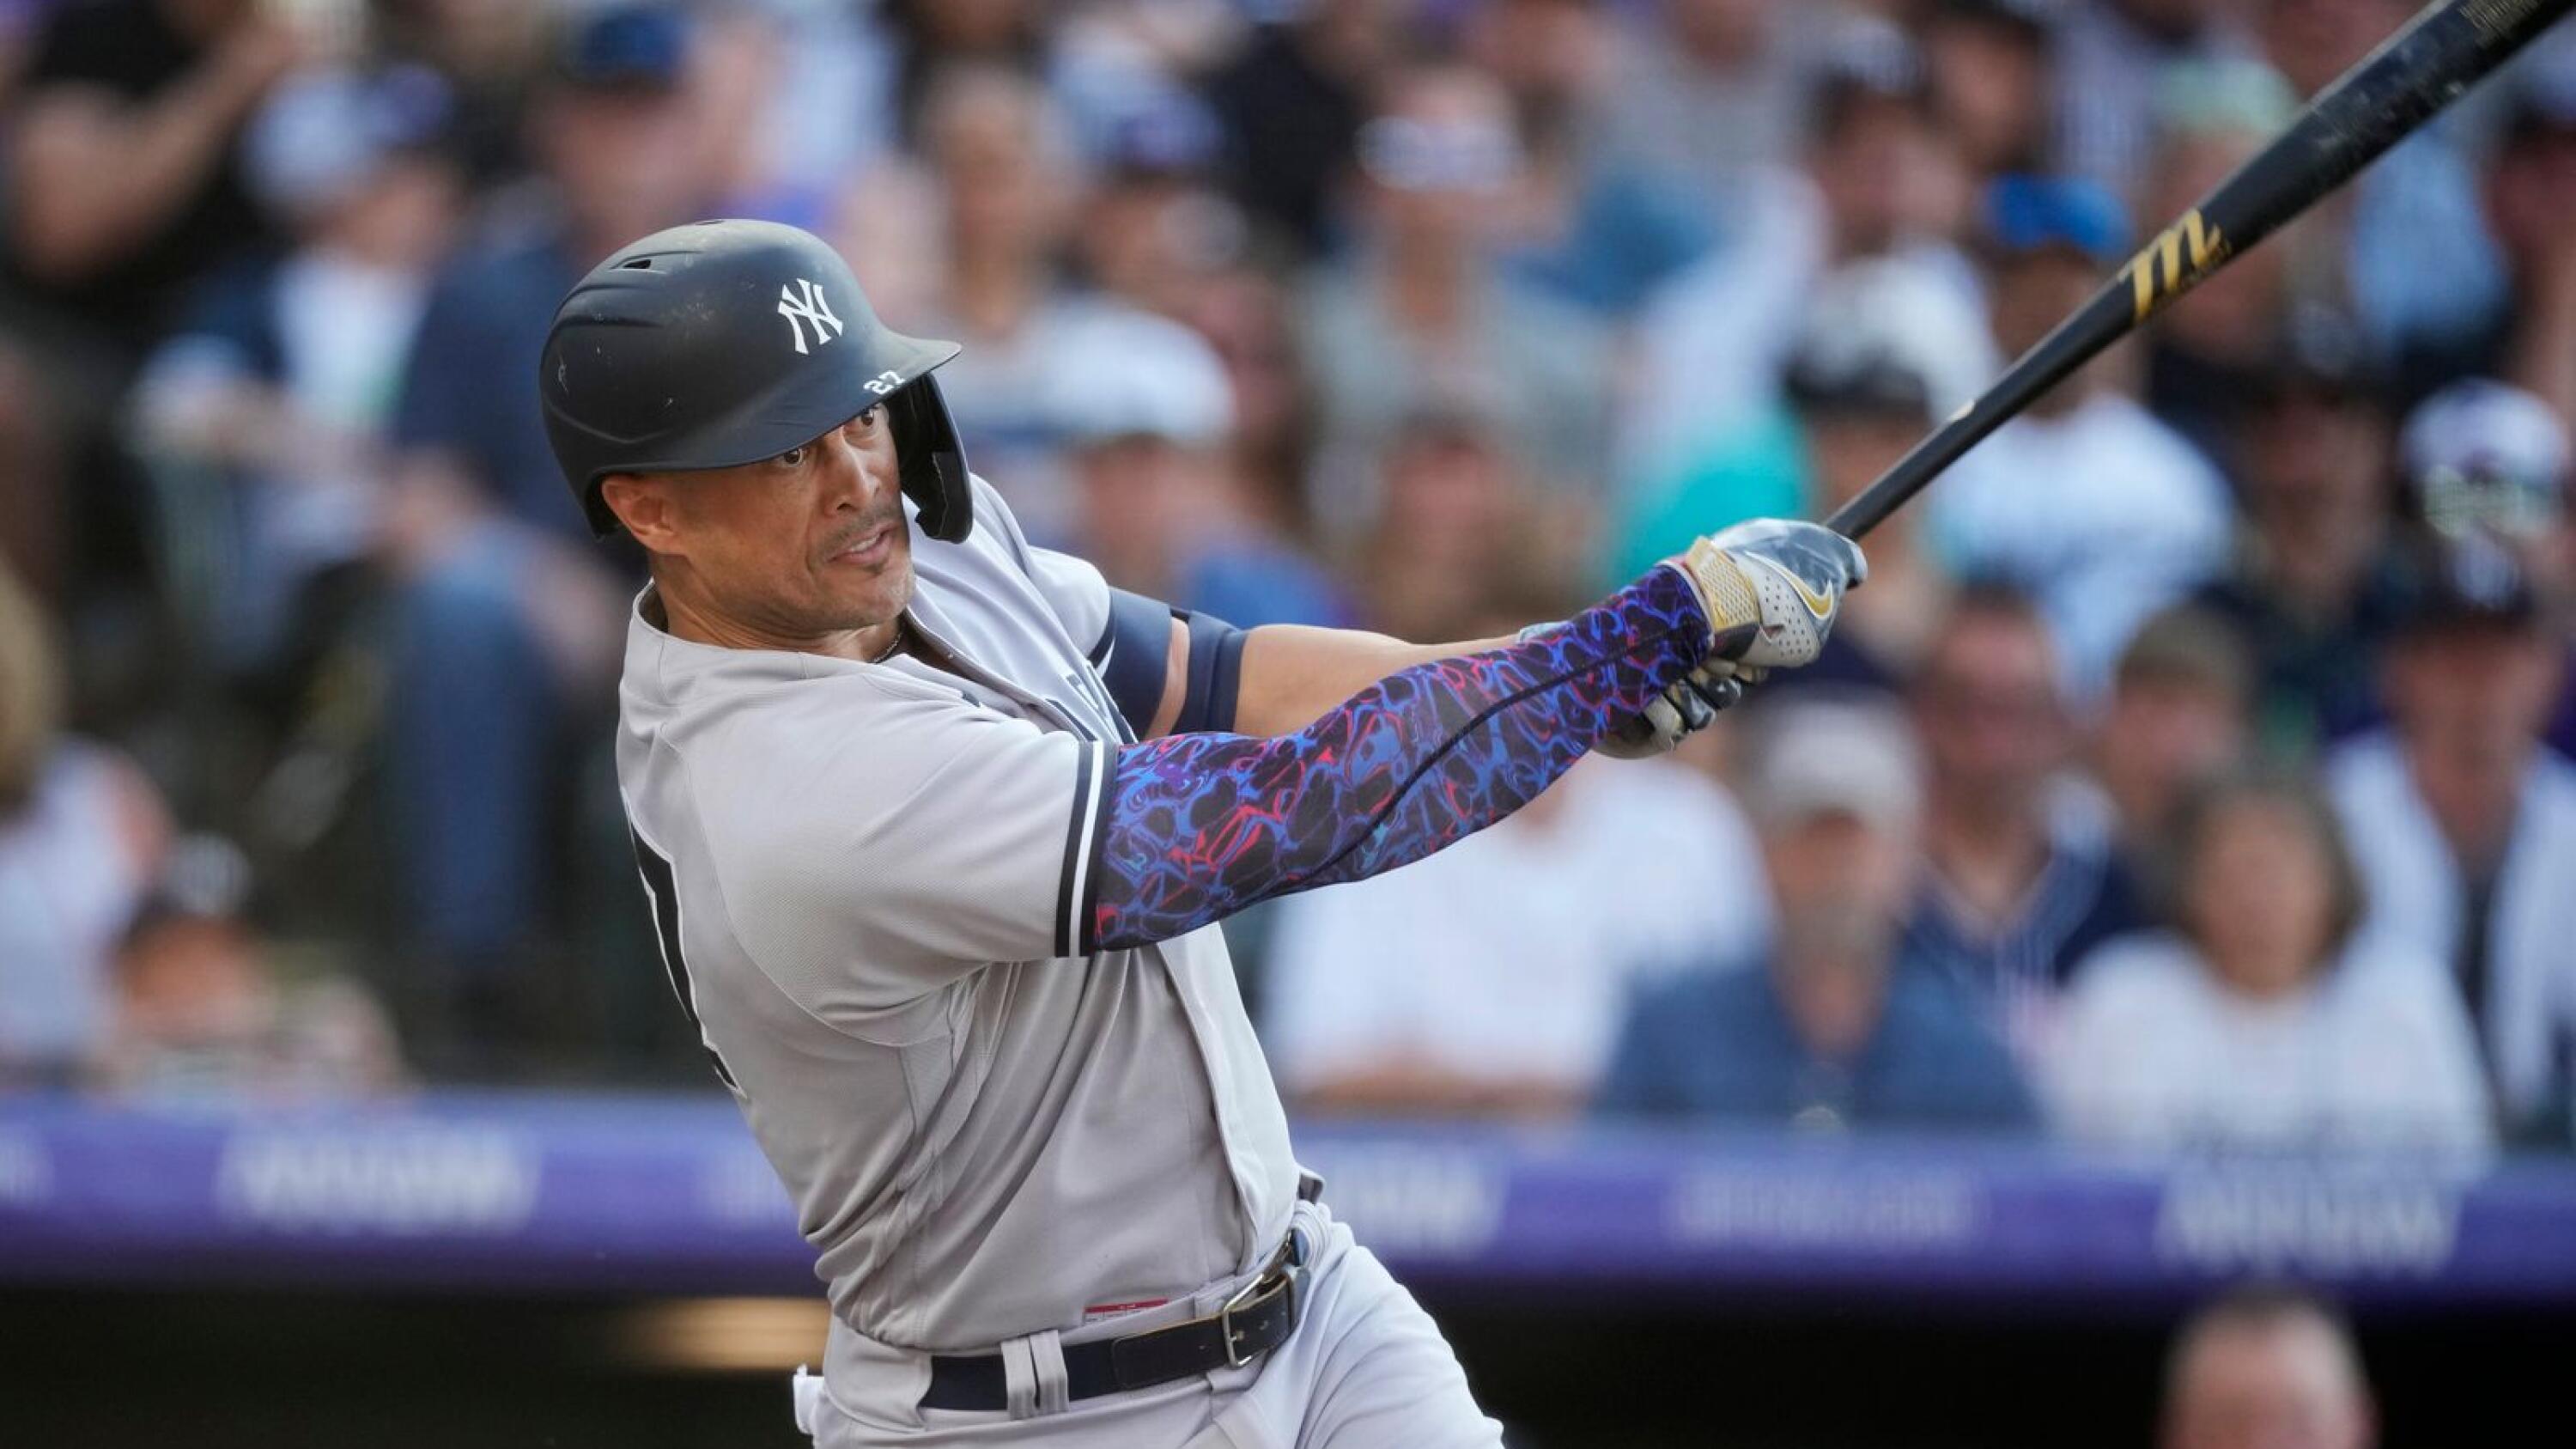 New York Yankees' Giancarlo Stanton reaches first base for a